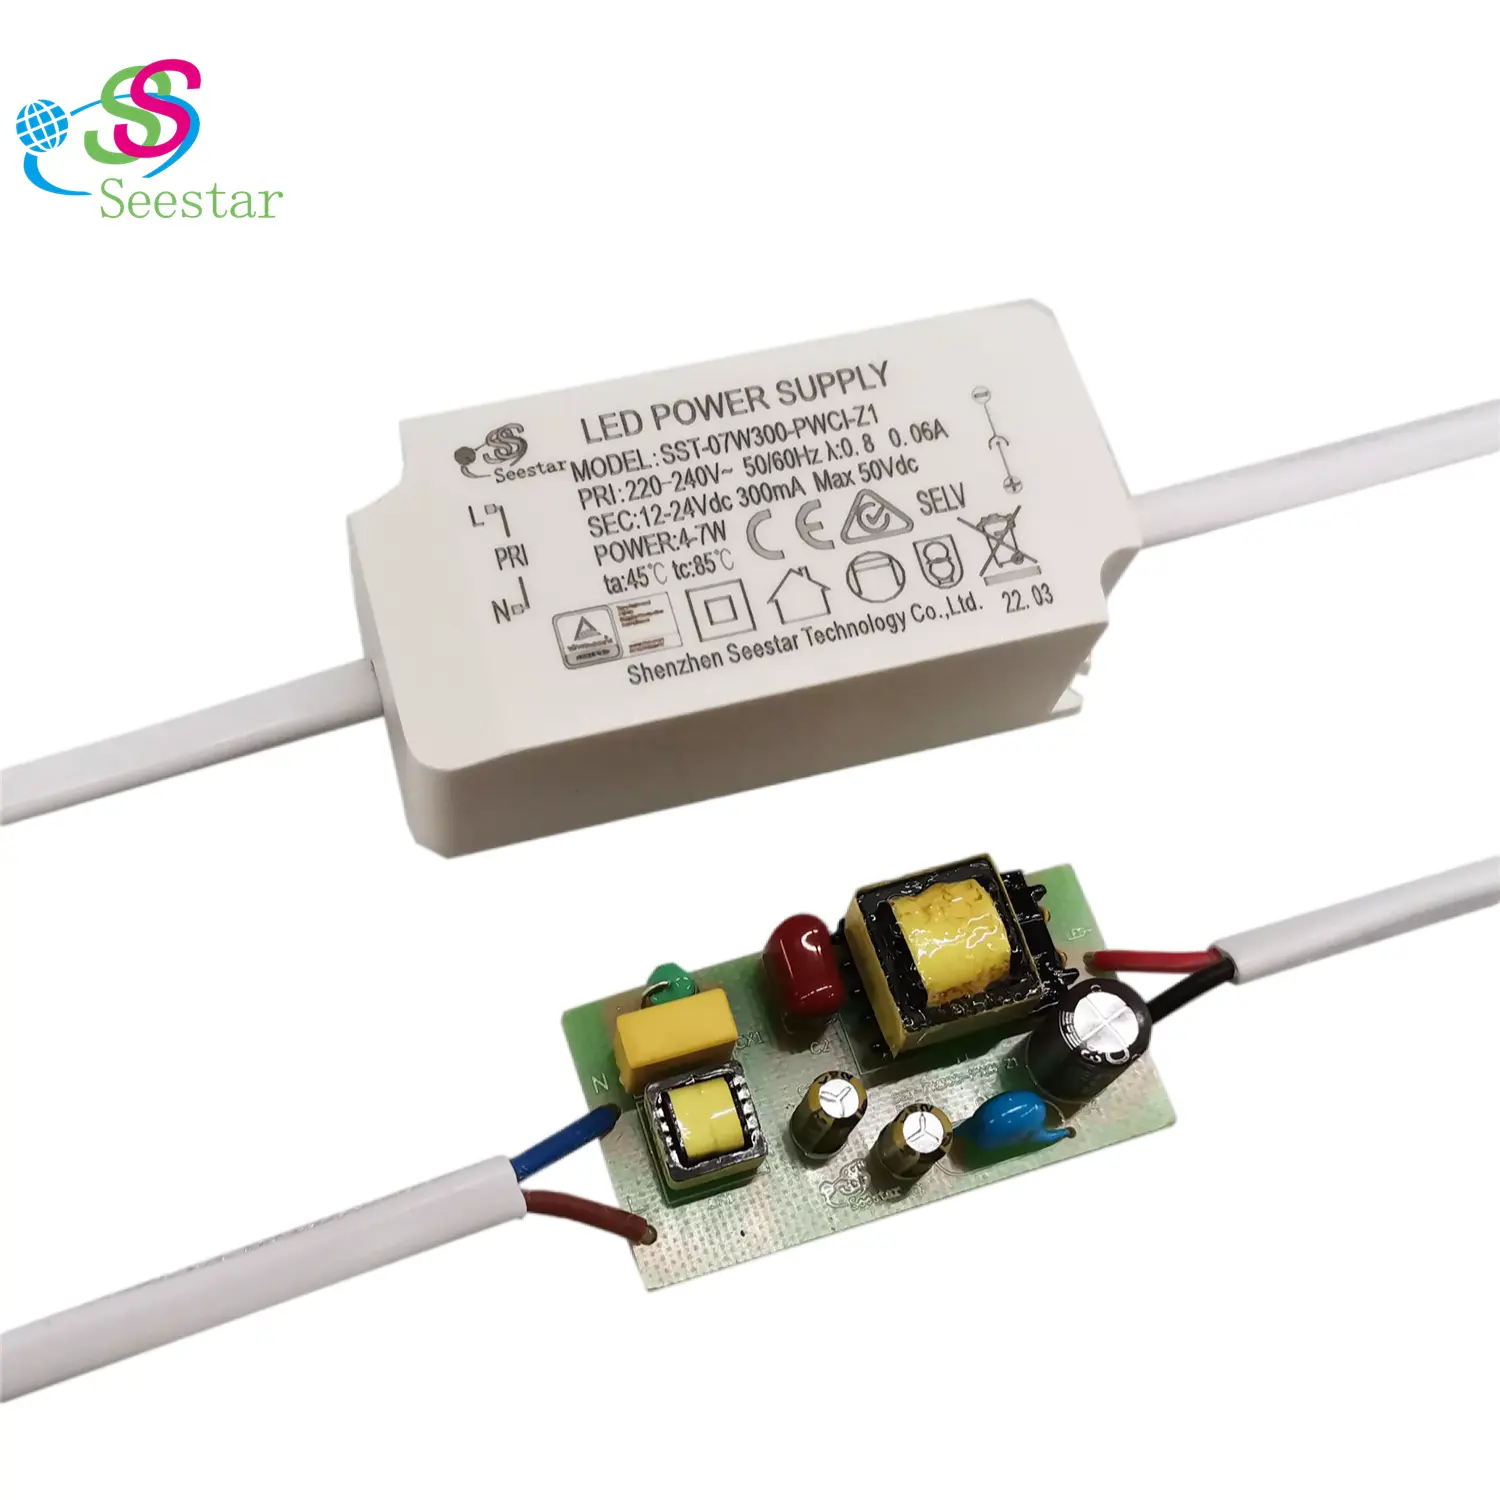 High Quality 4-7W DC12-24V 240-300mA CE Certified LED Driver EMC Standard LED Power Supply Isolated HPF No flicker Driver